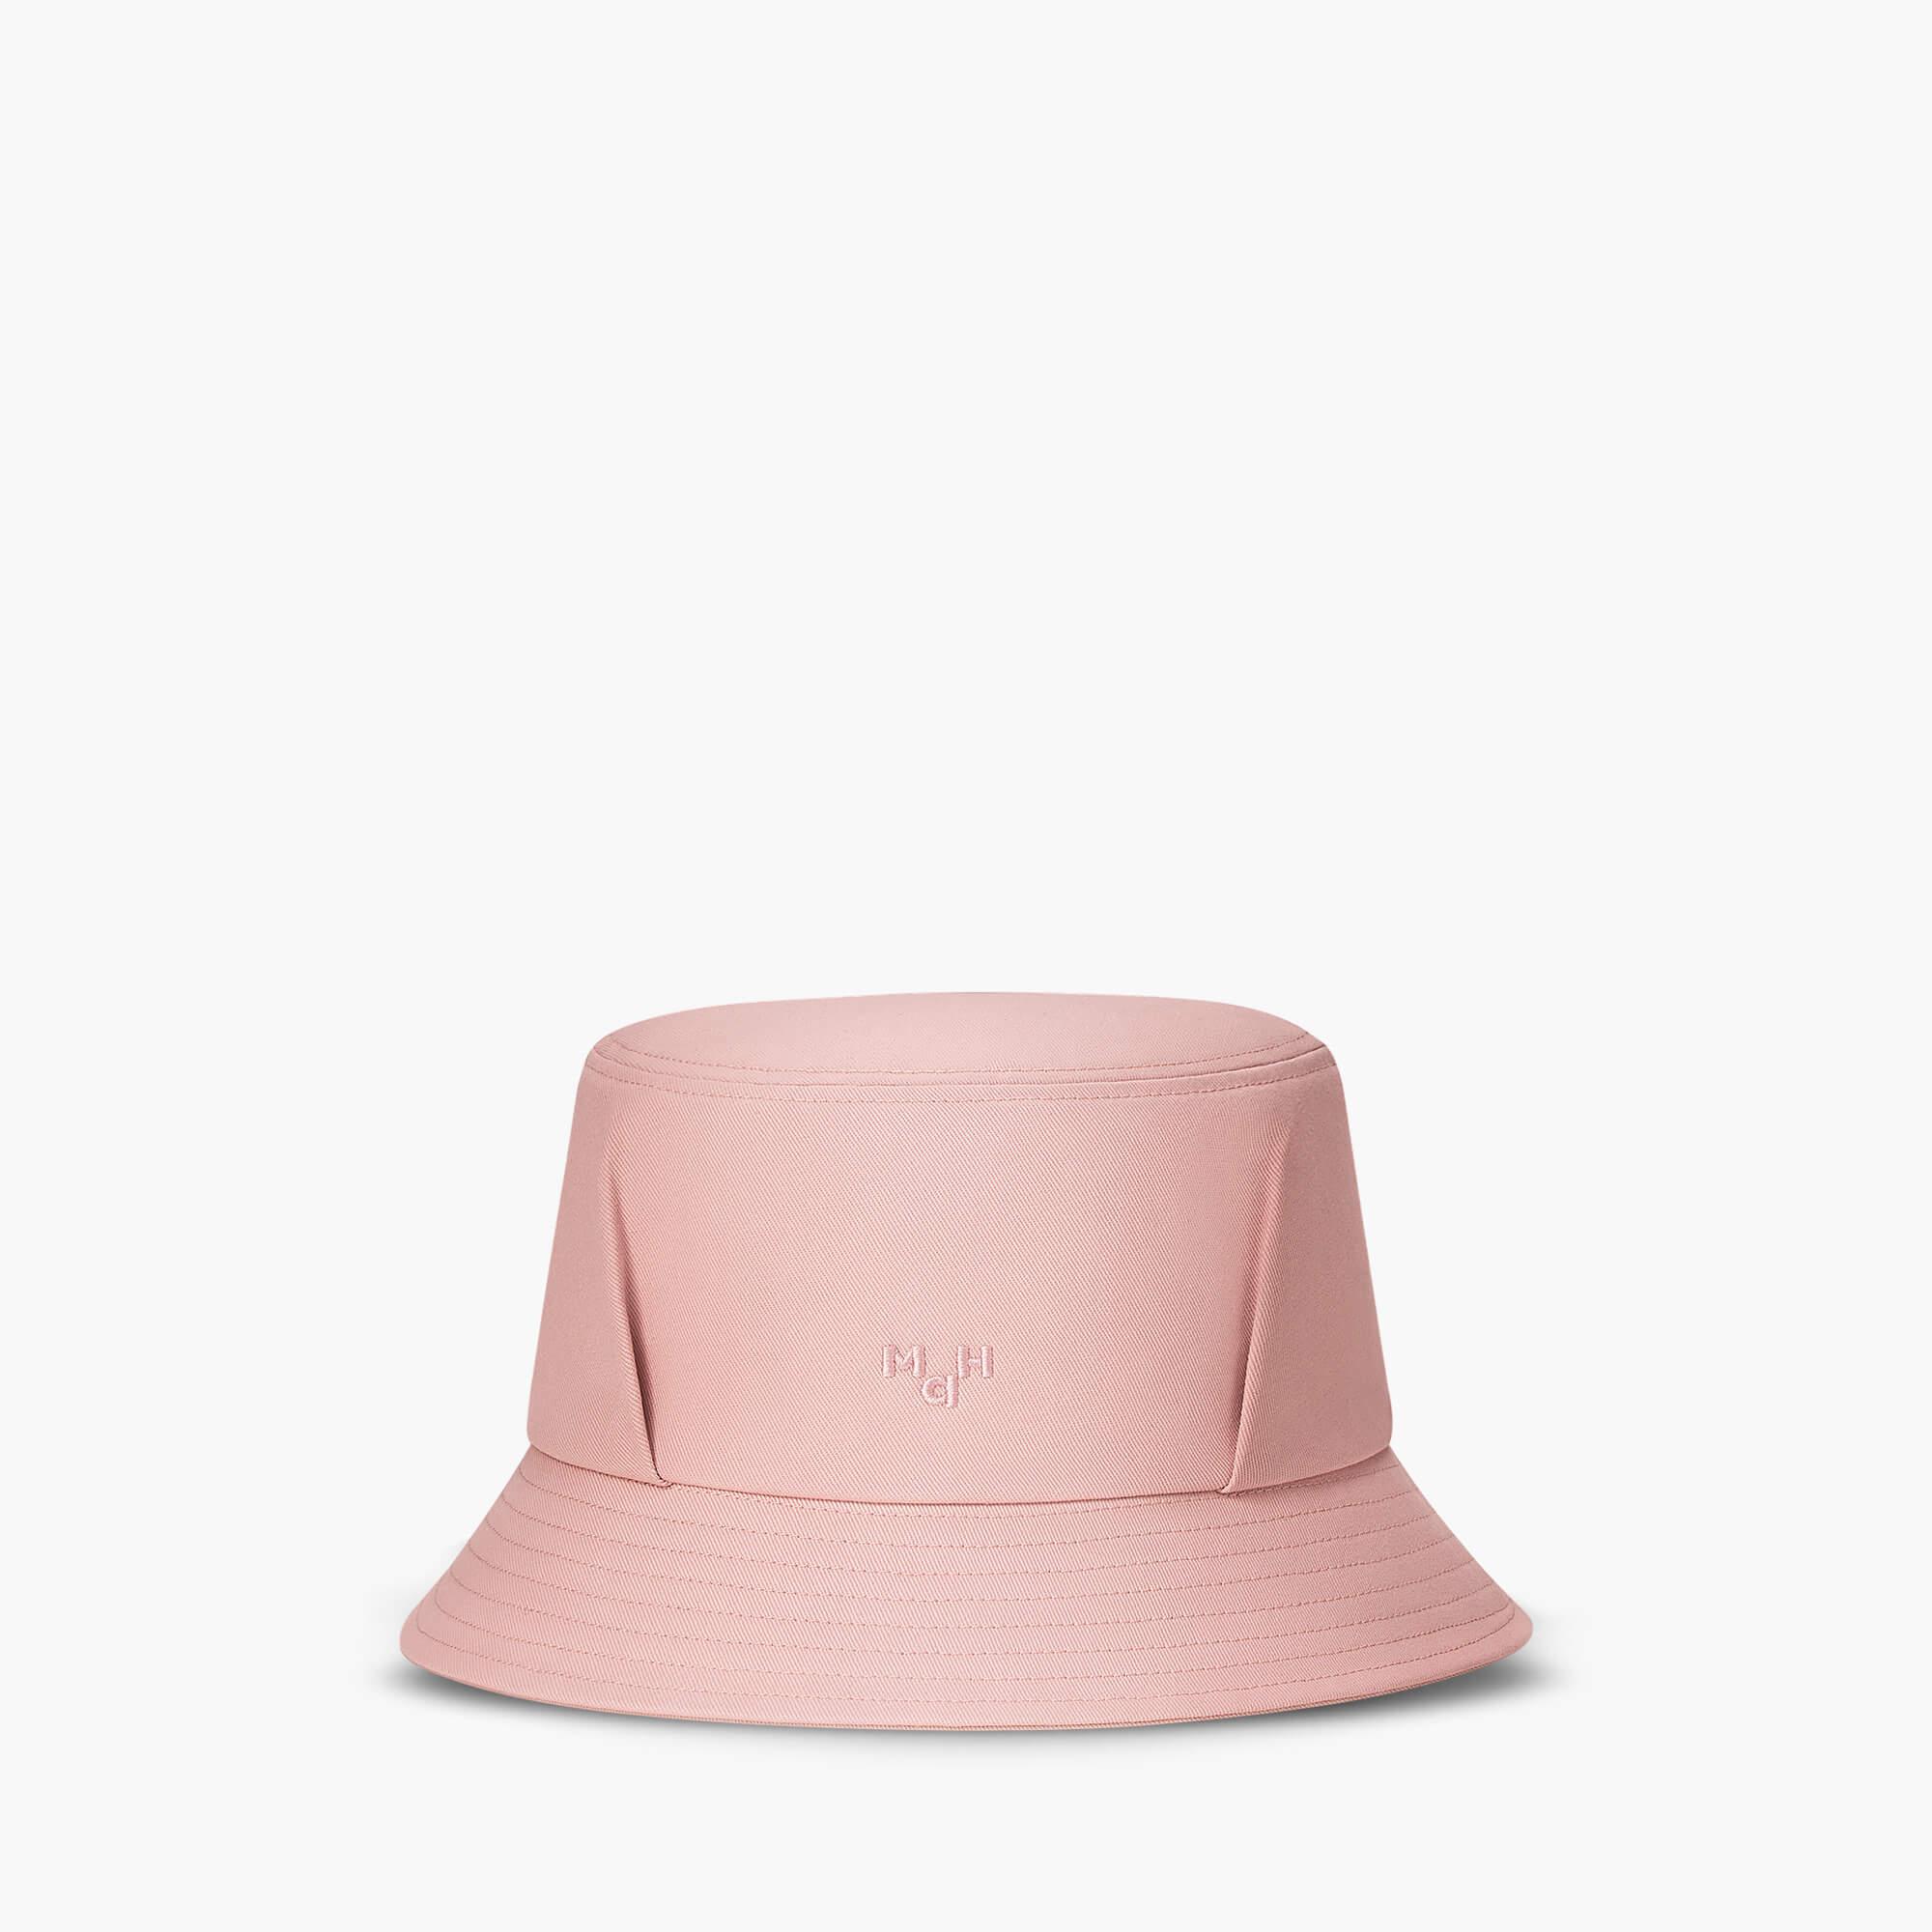 Cotton Sun hat For Summer - Pink